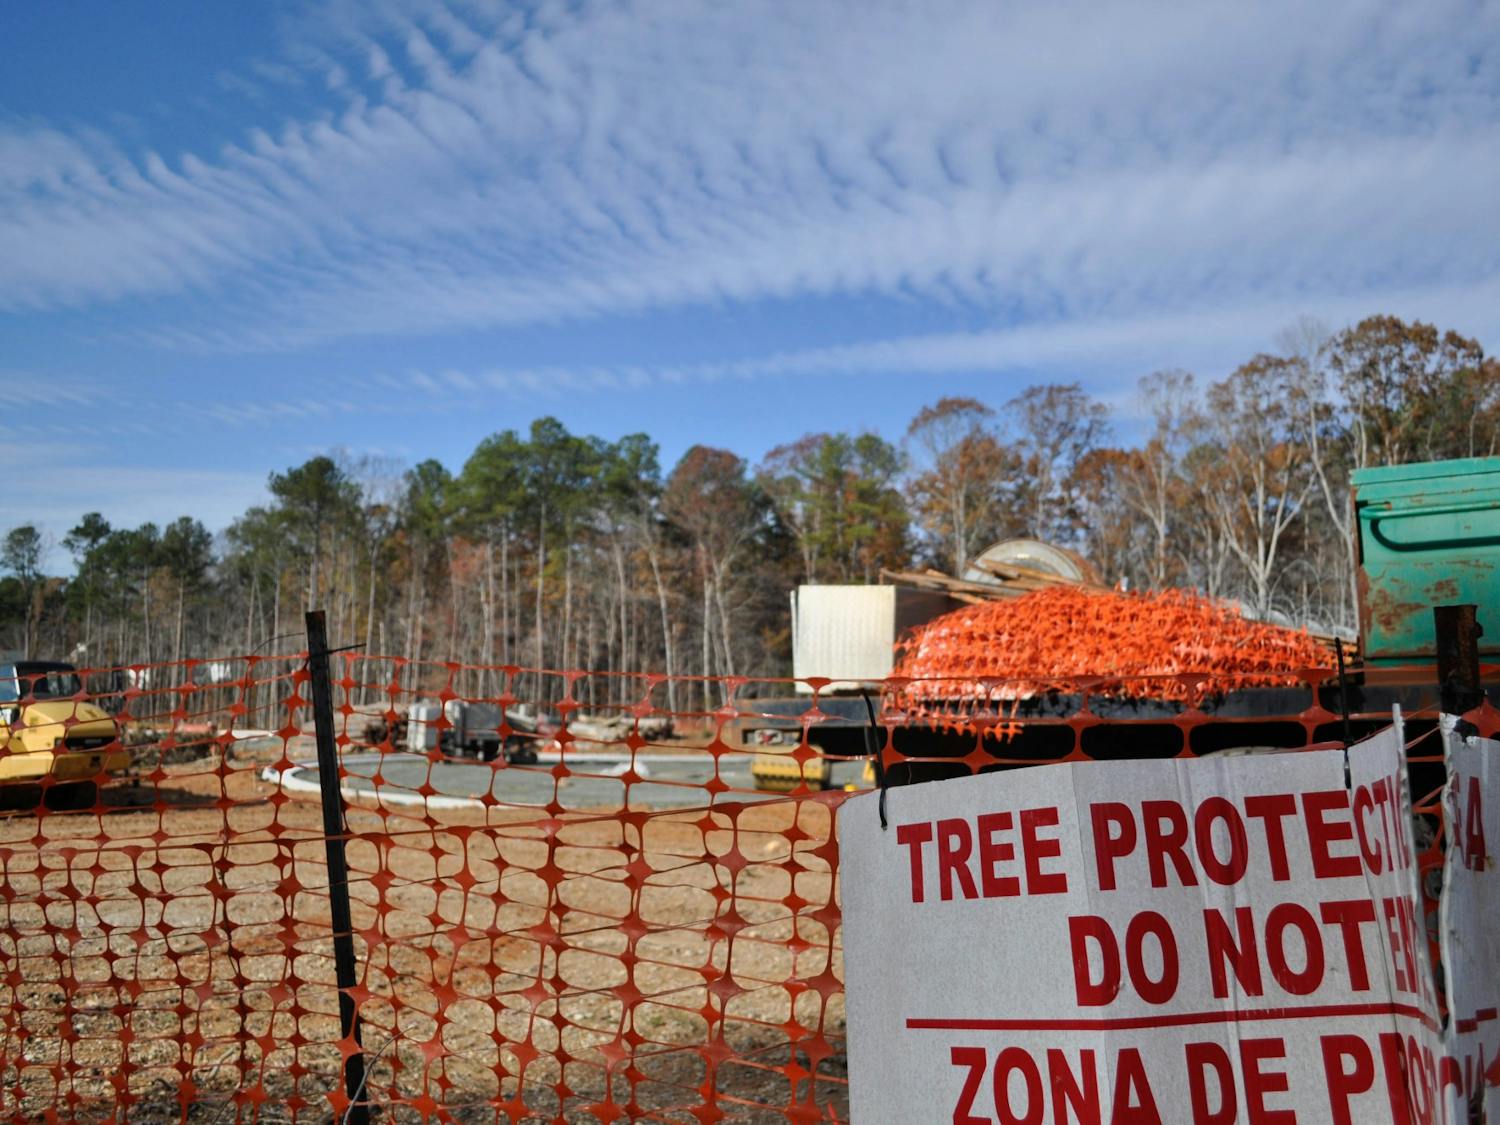 Construction is underway for a new residential development project located on Homestead Road on Sunday, Nov. 24, 2019. Plans of developing land near the corner of Eubanks Road and Old NC 86 raised concerns from residents about how Duke Forest's research and natural sites would be affected.